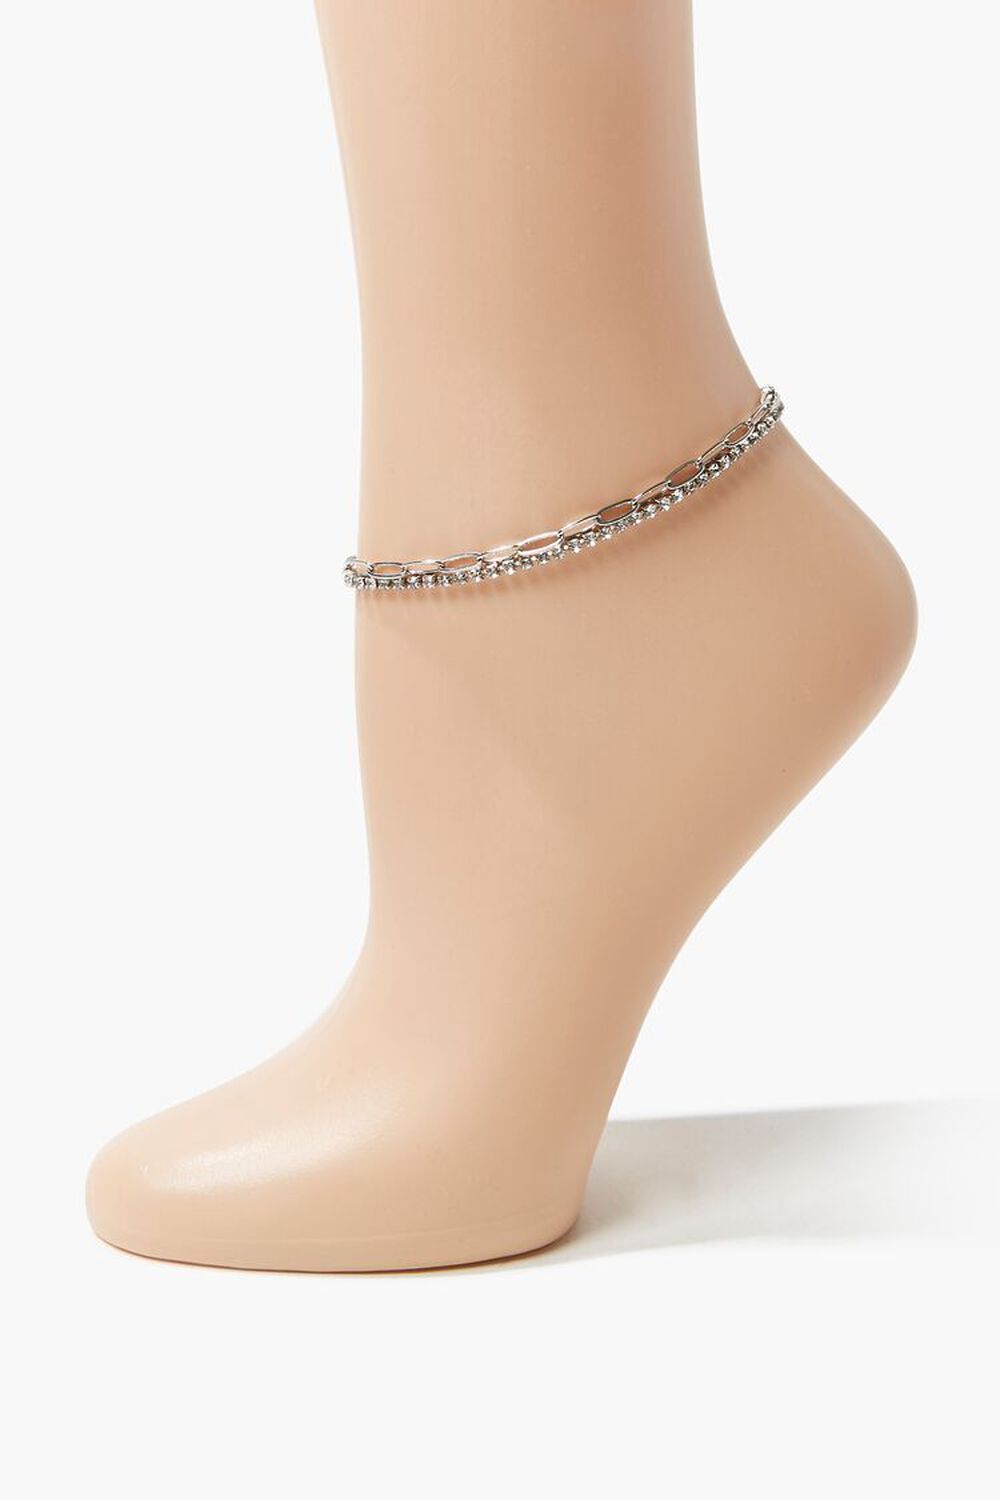 Layered Chain Anklet, image 1